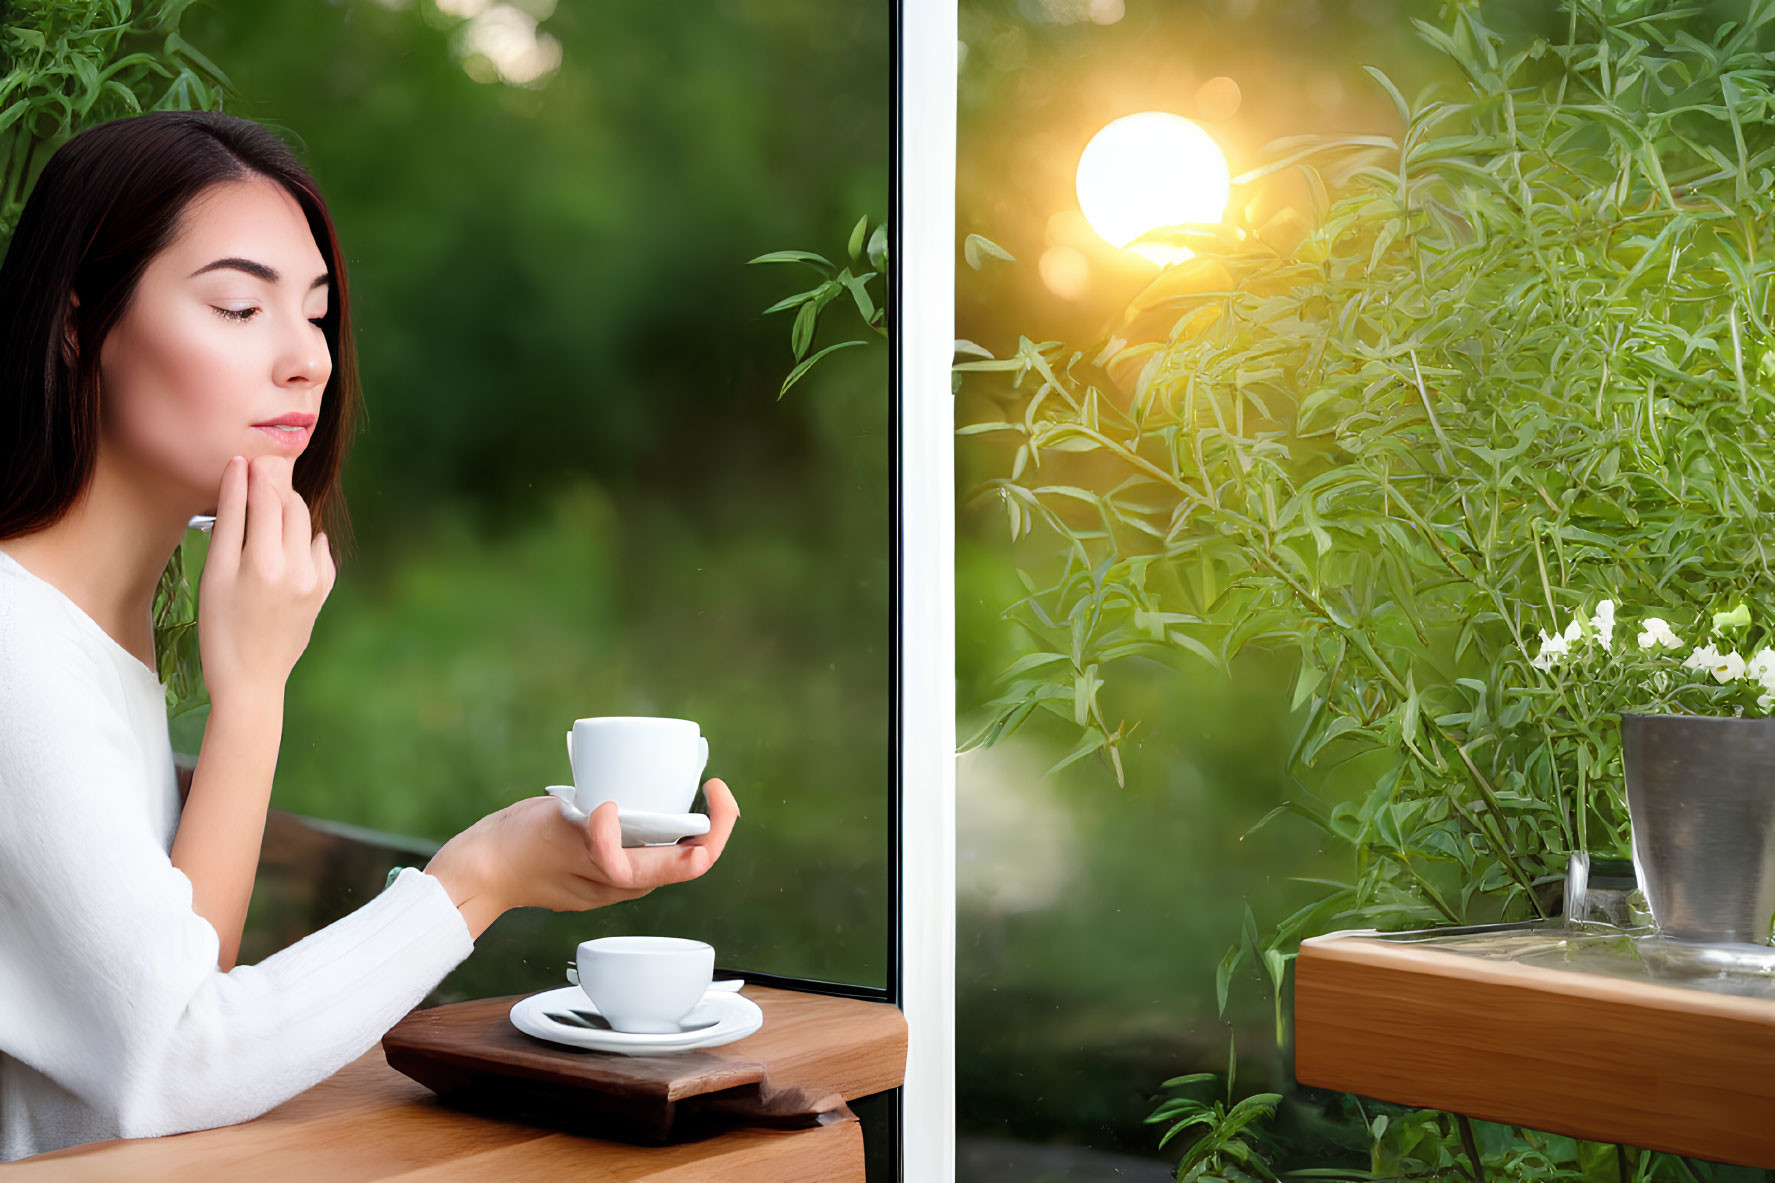 Woman in white sweater savoring coffee by window at sunset